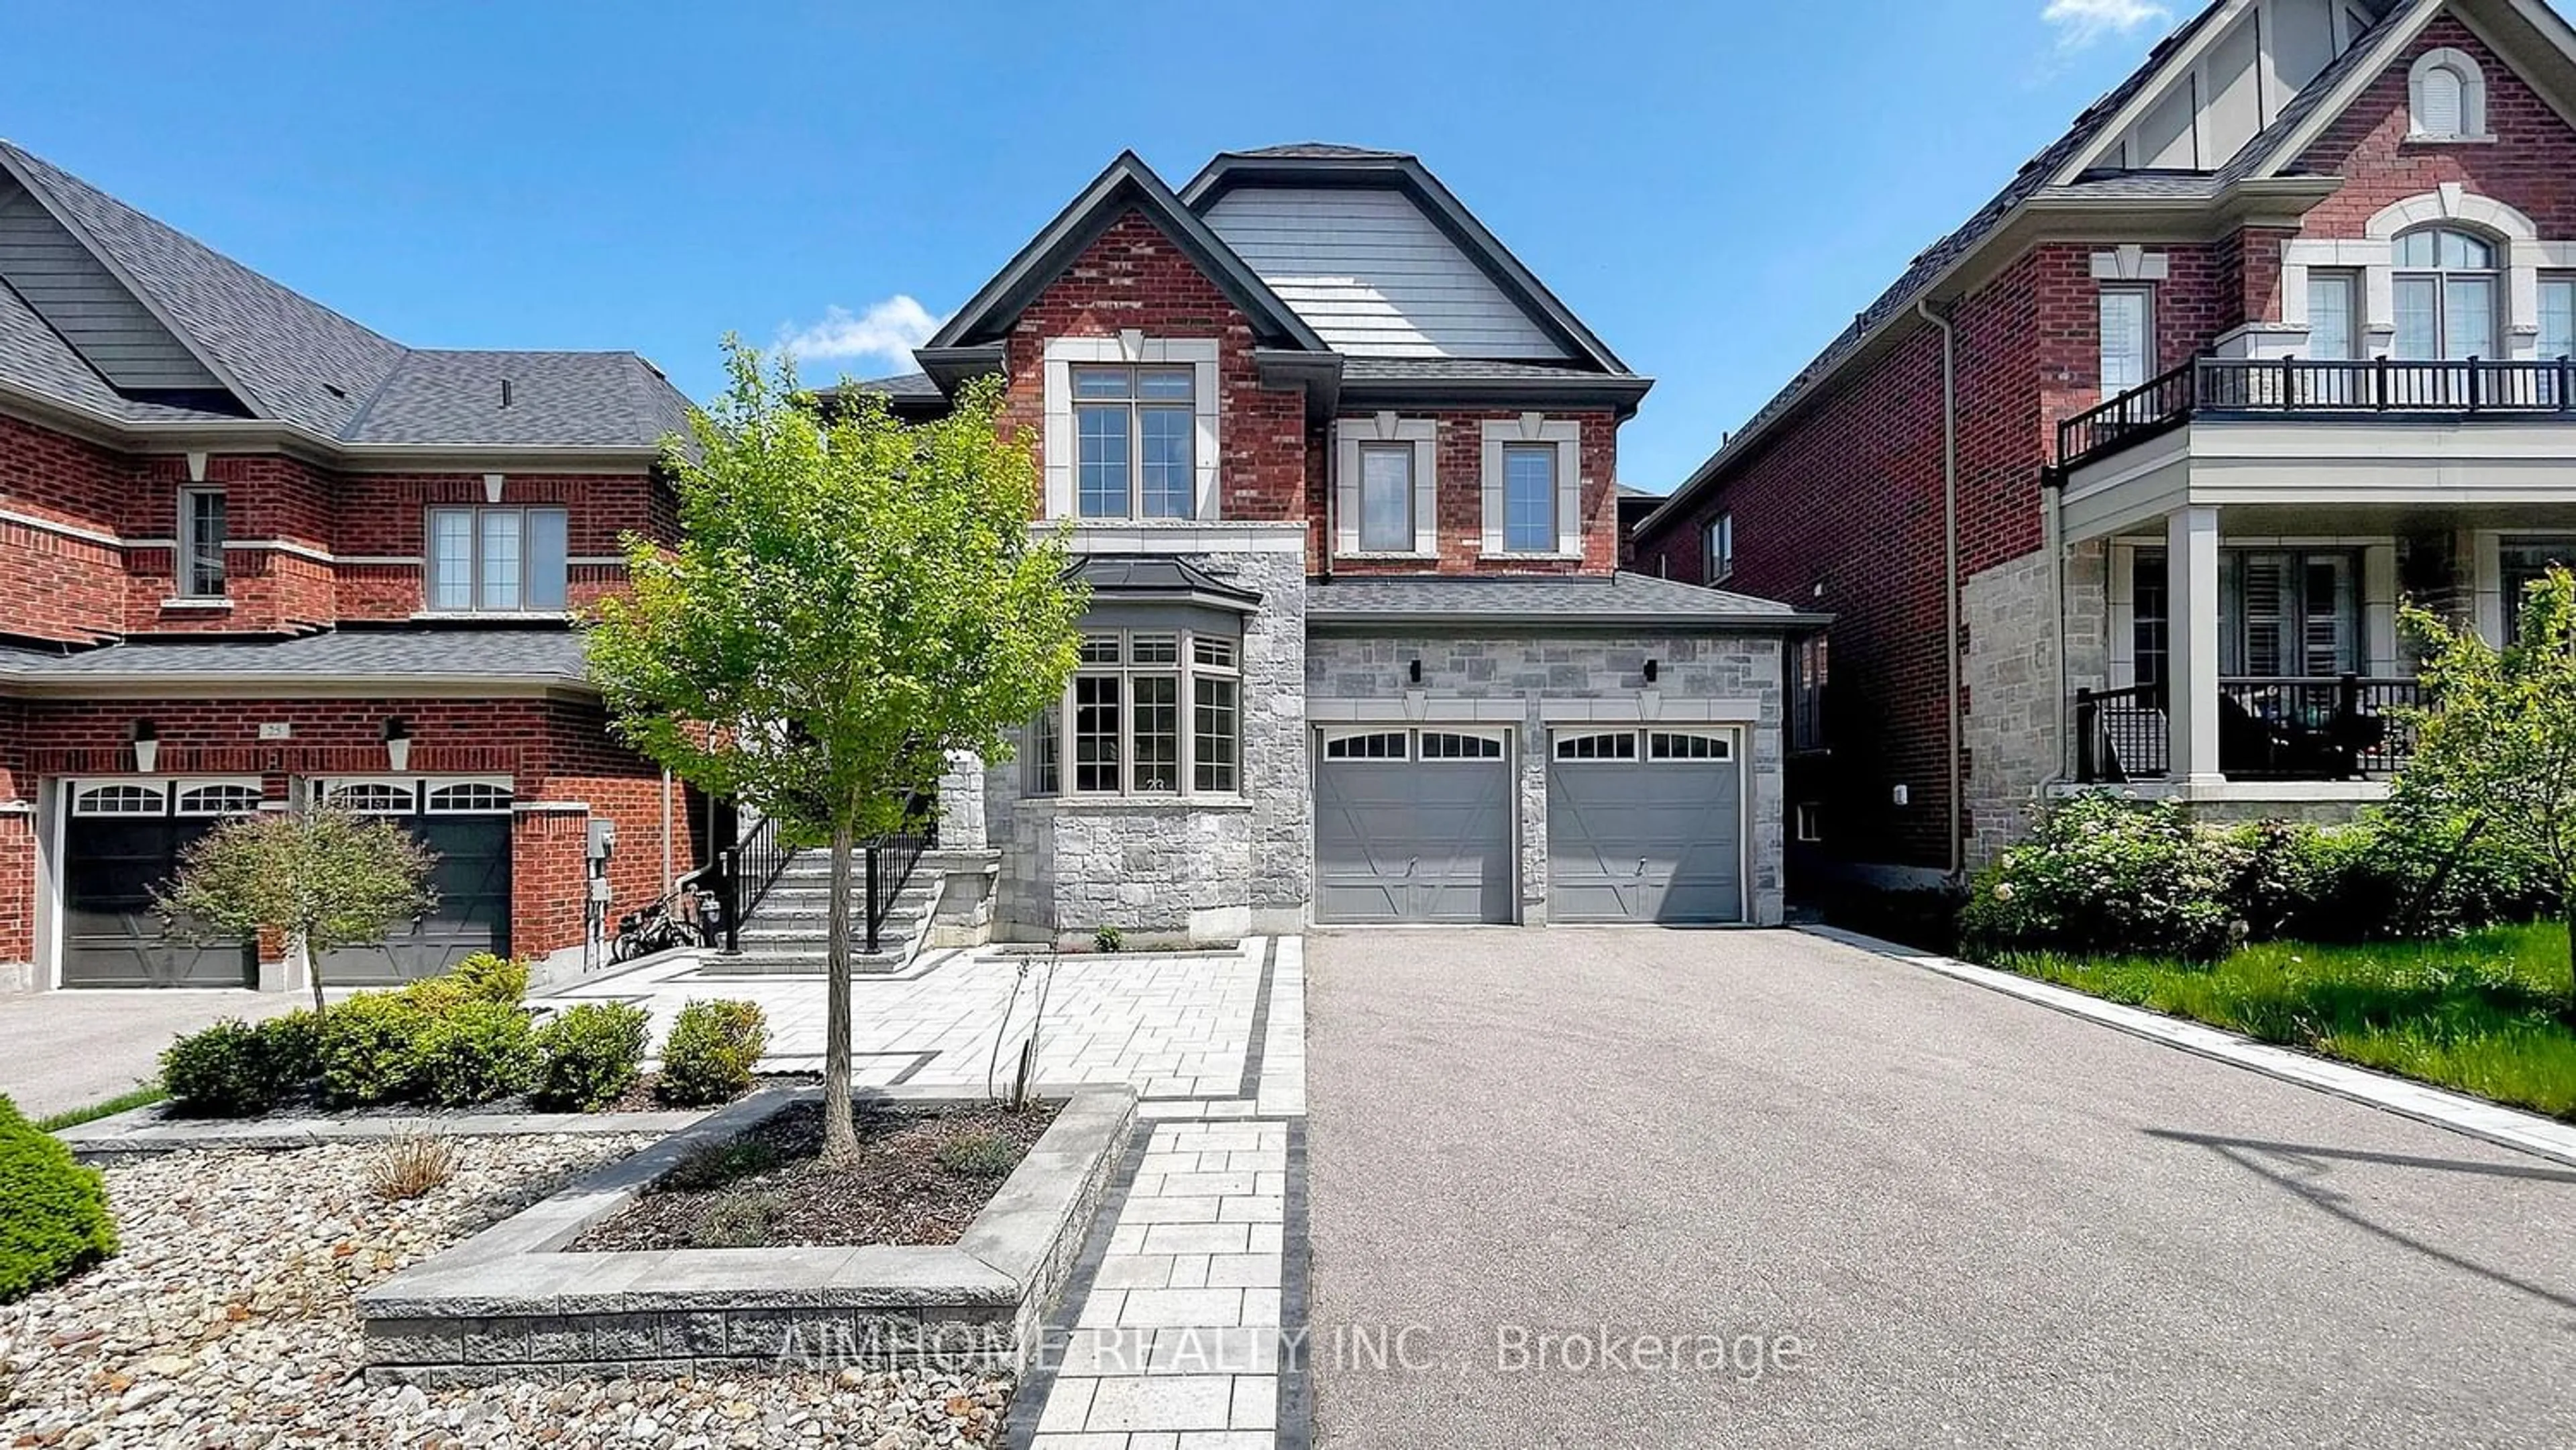 Home with brick exterior material for 23 Snap Dragon Tr, East Gwillimbury Ontario L9N 0S9